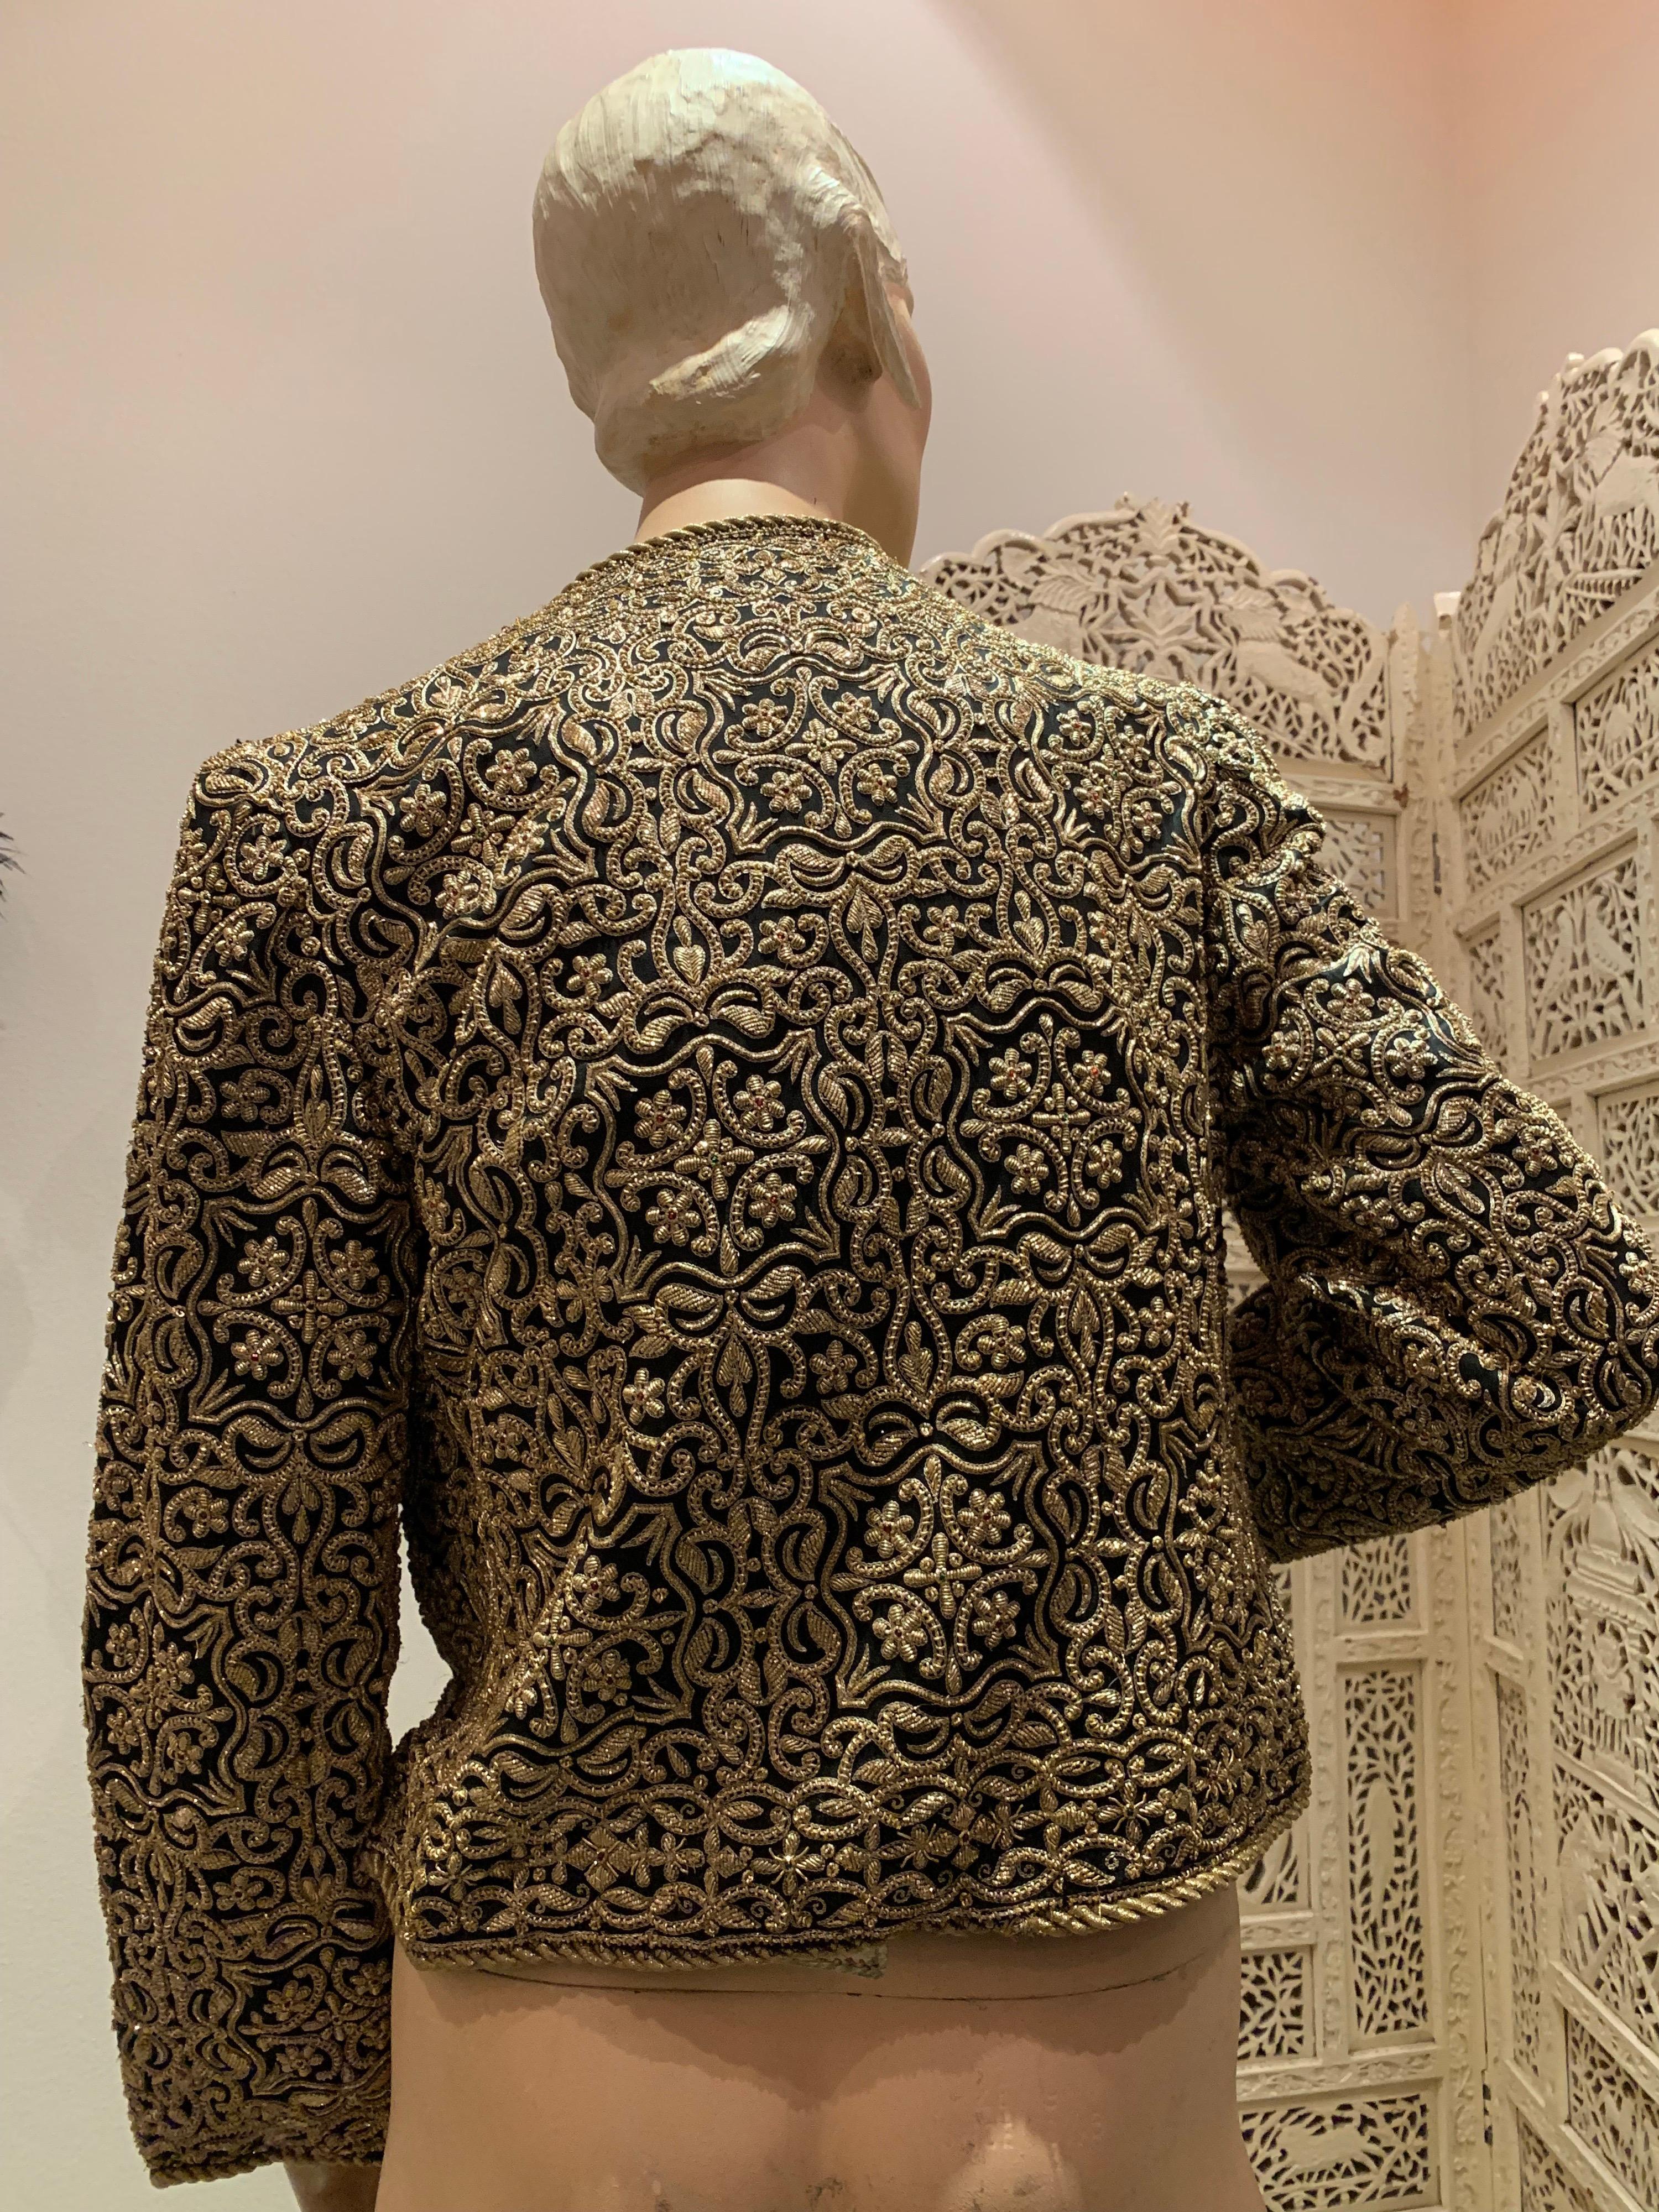 1980s  Bill Blass Evening Jacket W/ Heavily Encrusted Chain Embriodery Gold Work For Sale 3